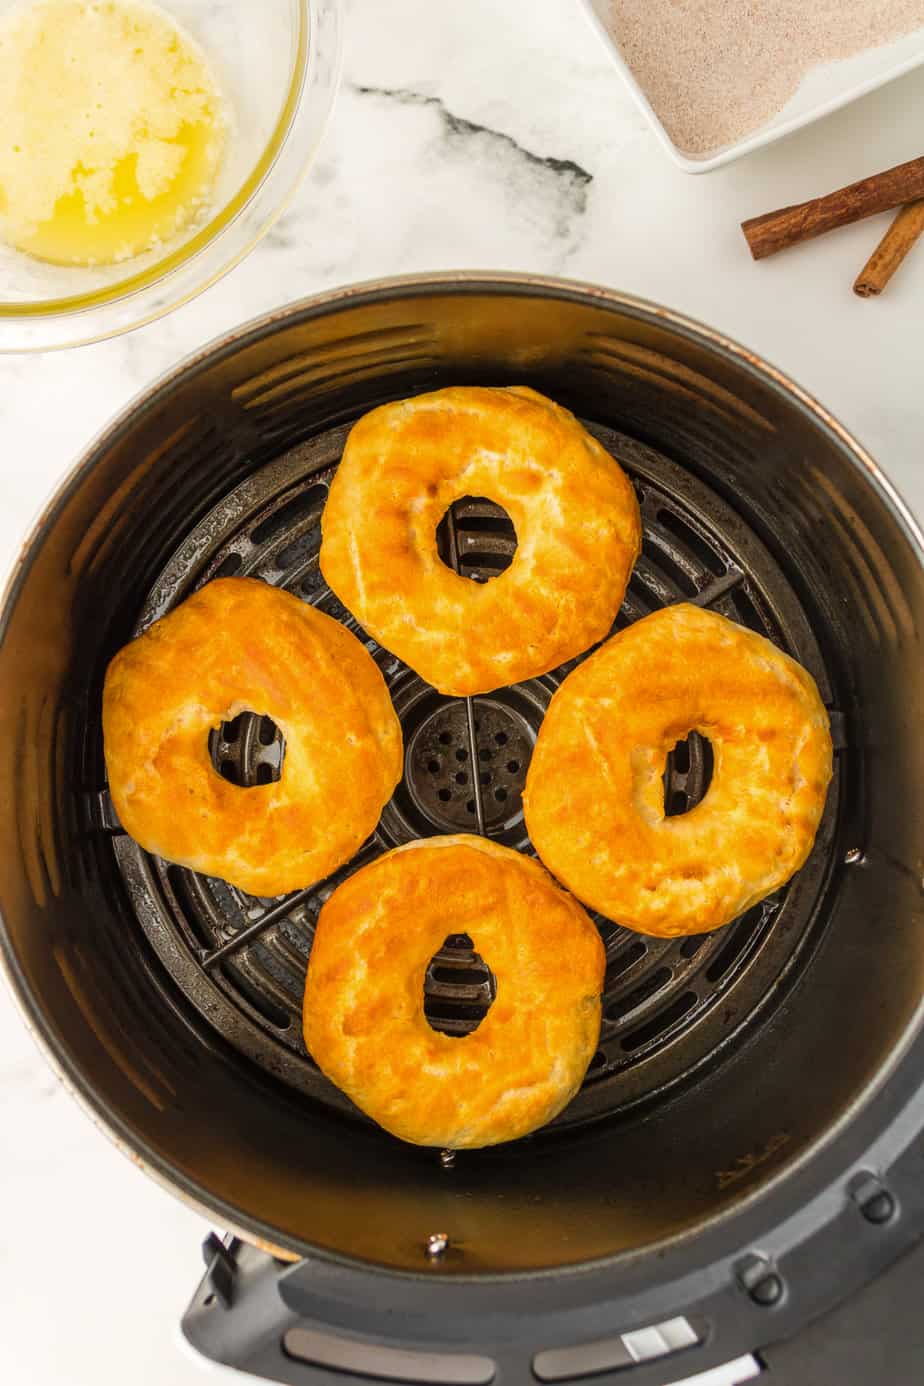 Four golden brown donuts made of biscuit dough in the basket of an air fryer from above on the counter with a bowl of melted butter and cinnamon sugar nearby on the counter.